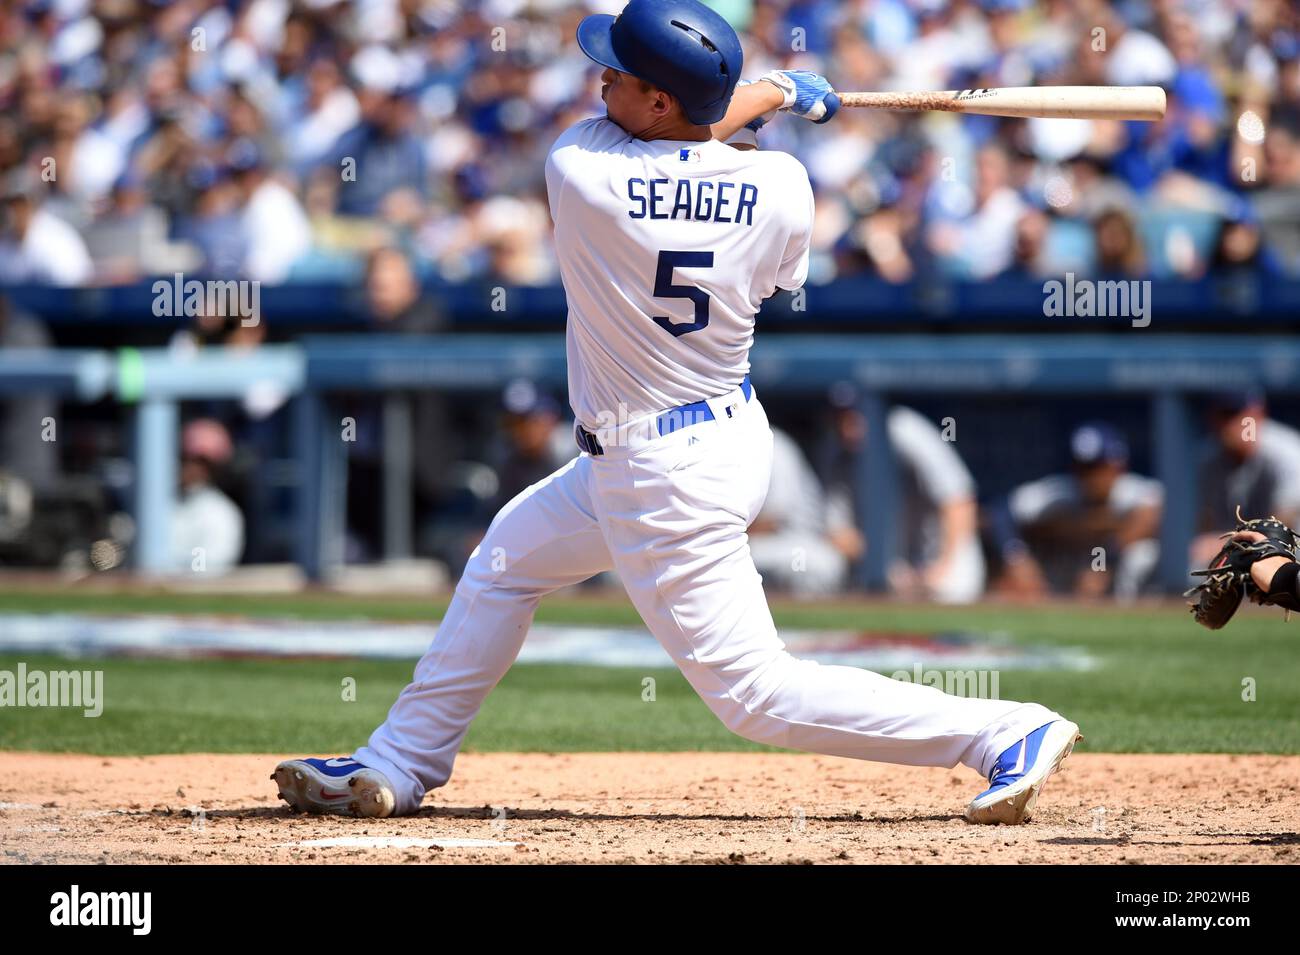 LOS ANGELES, CA - APRIL 03: Los Angeles Dodgers Shortstop Corey Seager (5)  hits a three run home run in the bottom of the 5th inning during an MLB  opening day game